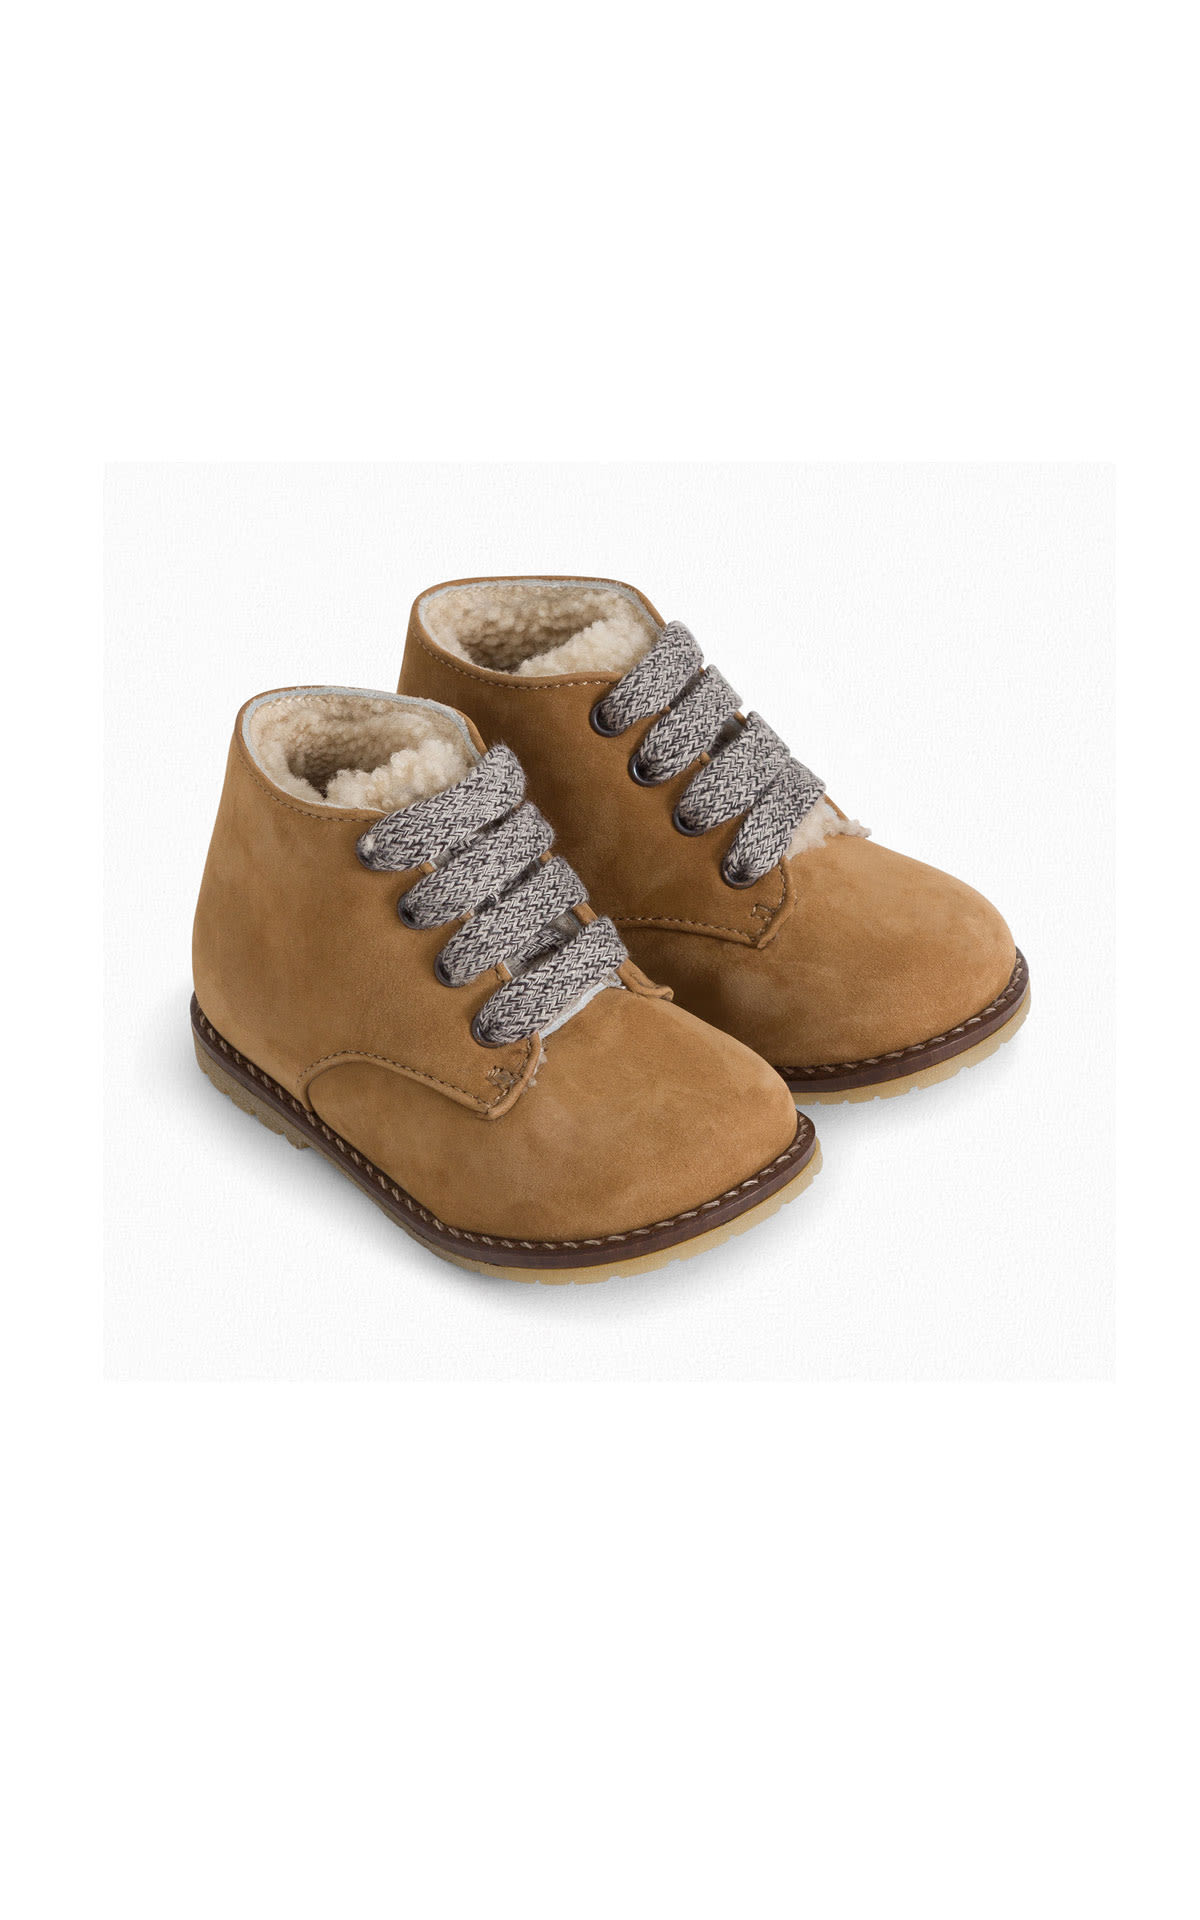 Bonpoint Litwood suede boots from Bicester Village